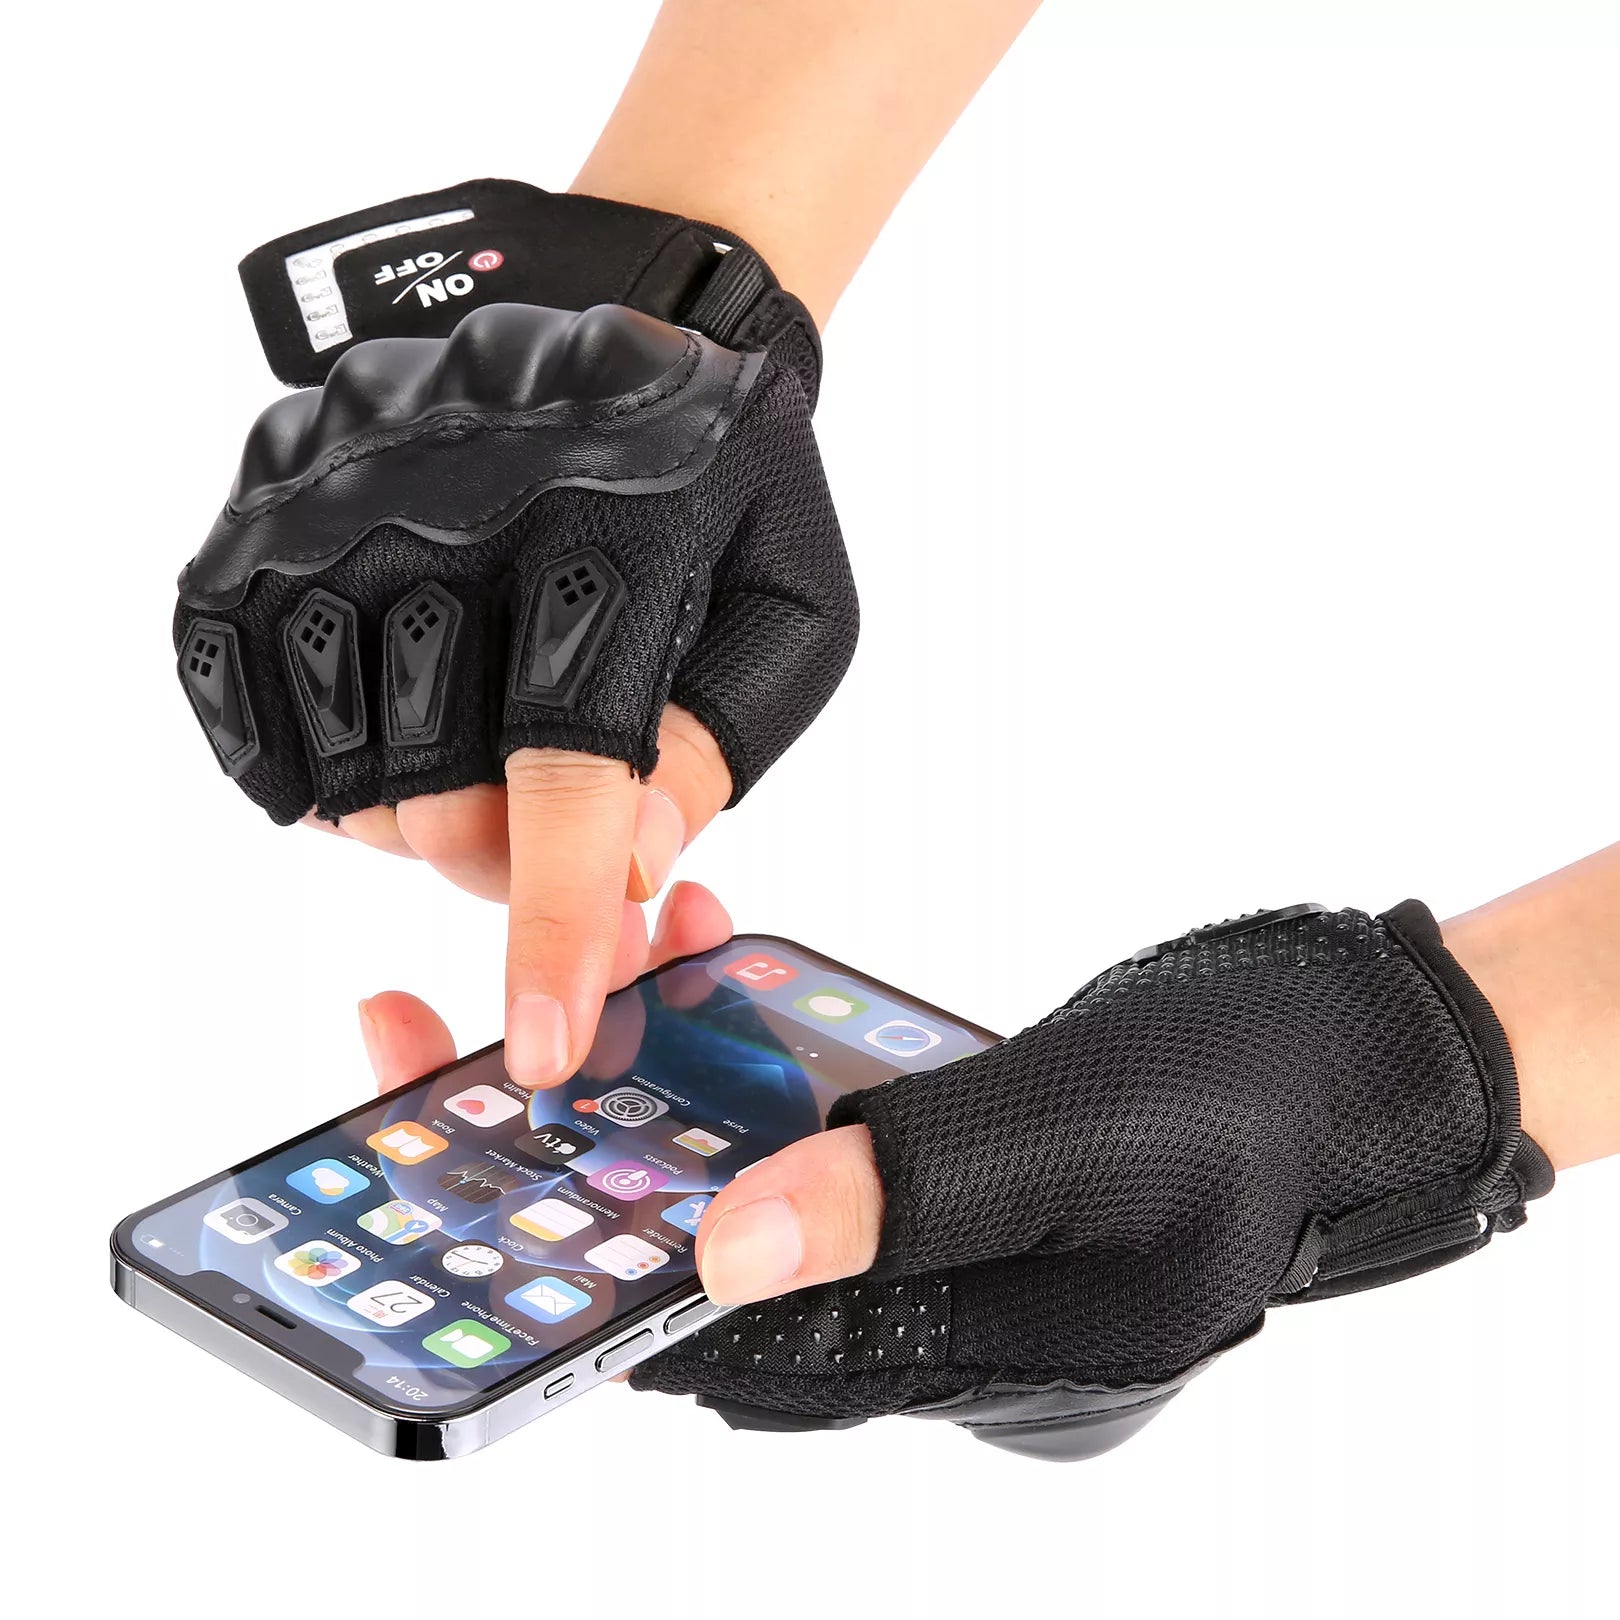 vanpowers Introducing automatic induction cycling electric bicycle knitted gloves. These gloves intelligently recognize your turning direction while riding, causing the warning light to flash and alert pedestrians behind you. This feature enhances safety during your ride.